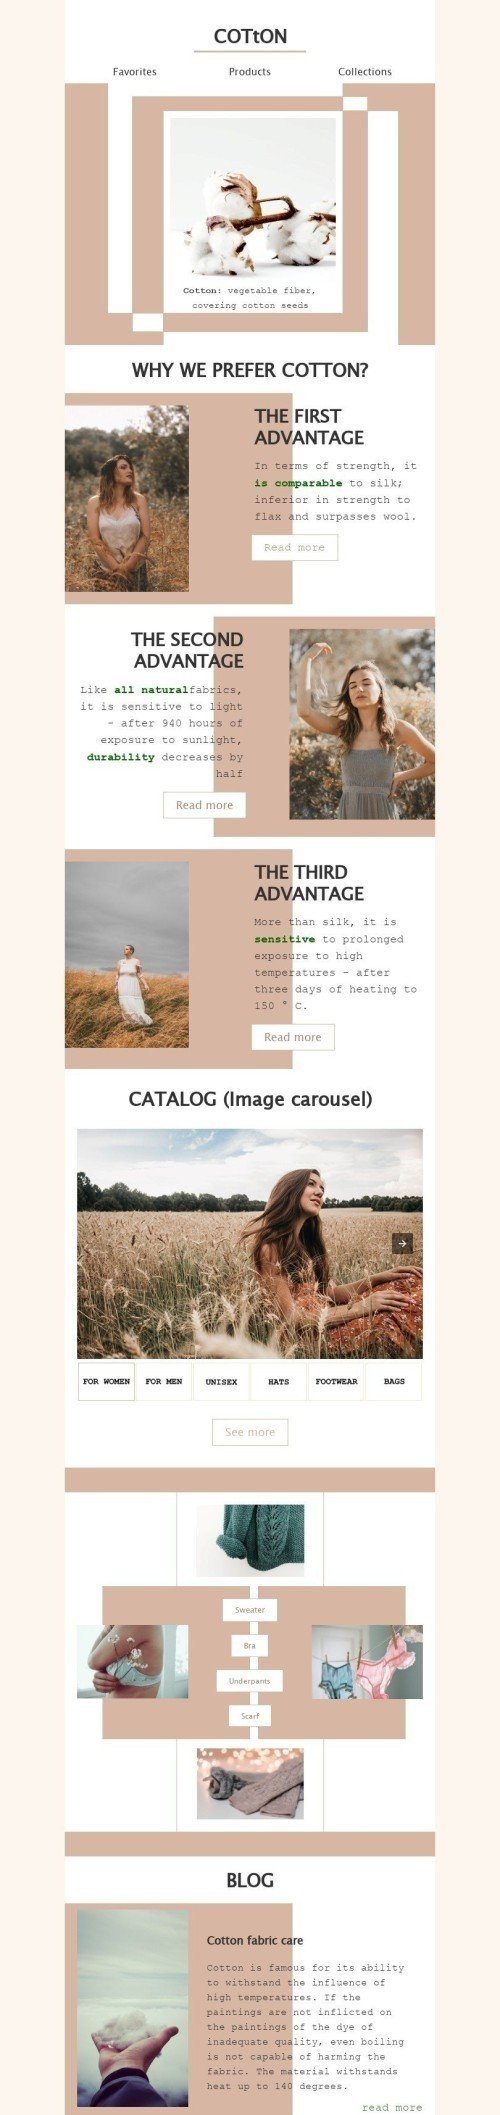 Promo Email Template «Сotton: feel the freedom» for Fashion industry desktop view